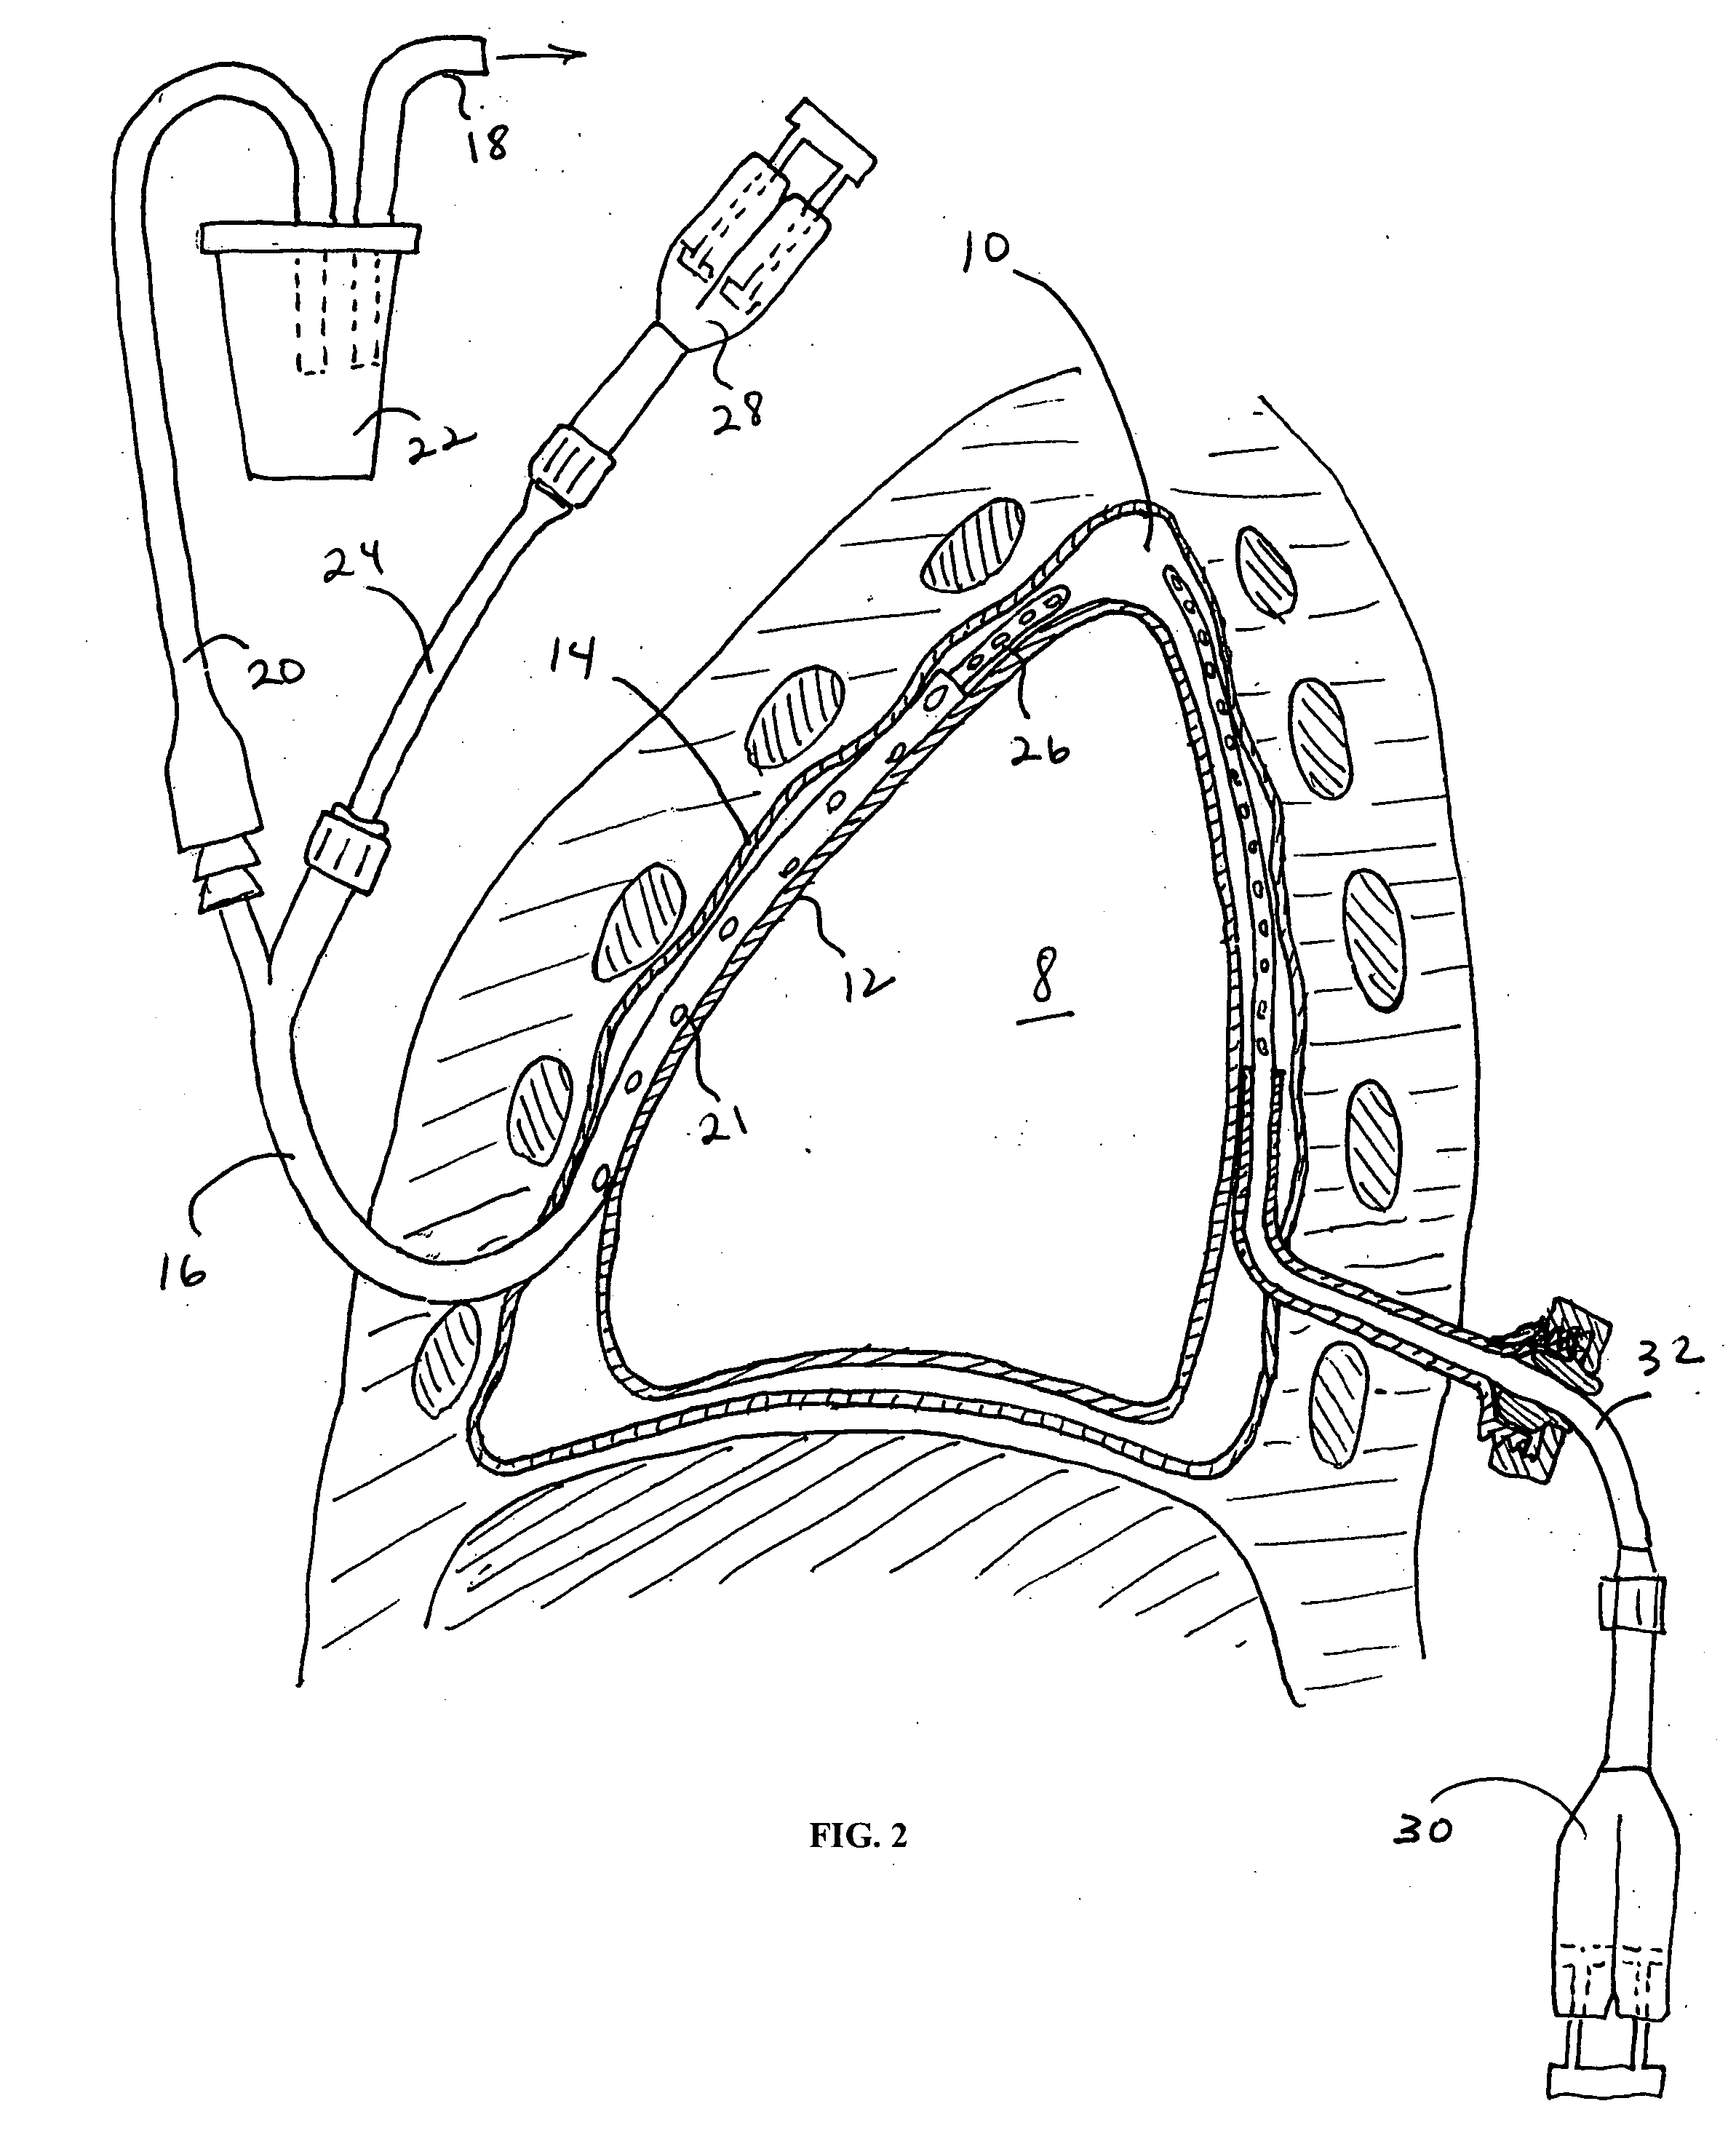 Pleural effusion treatment device, method and material